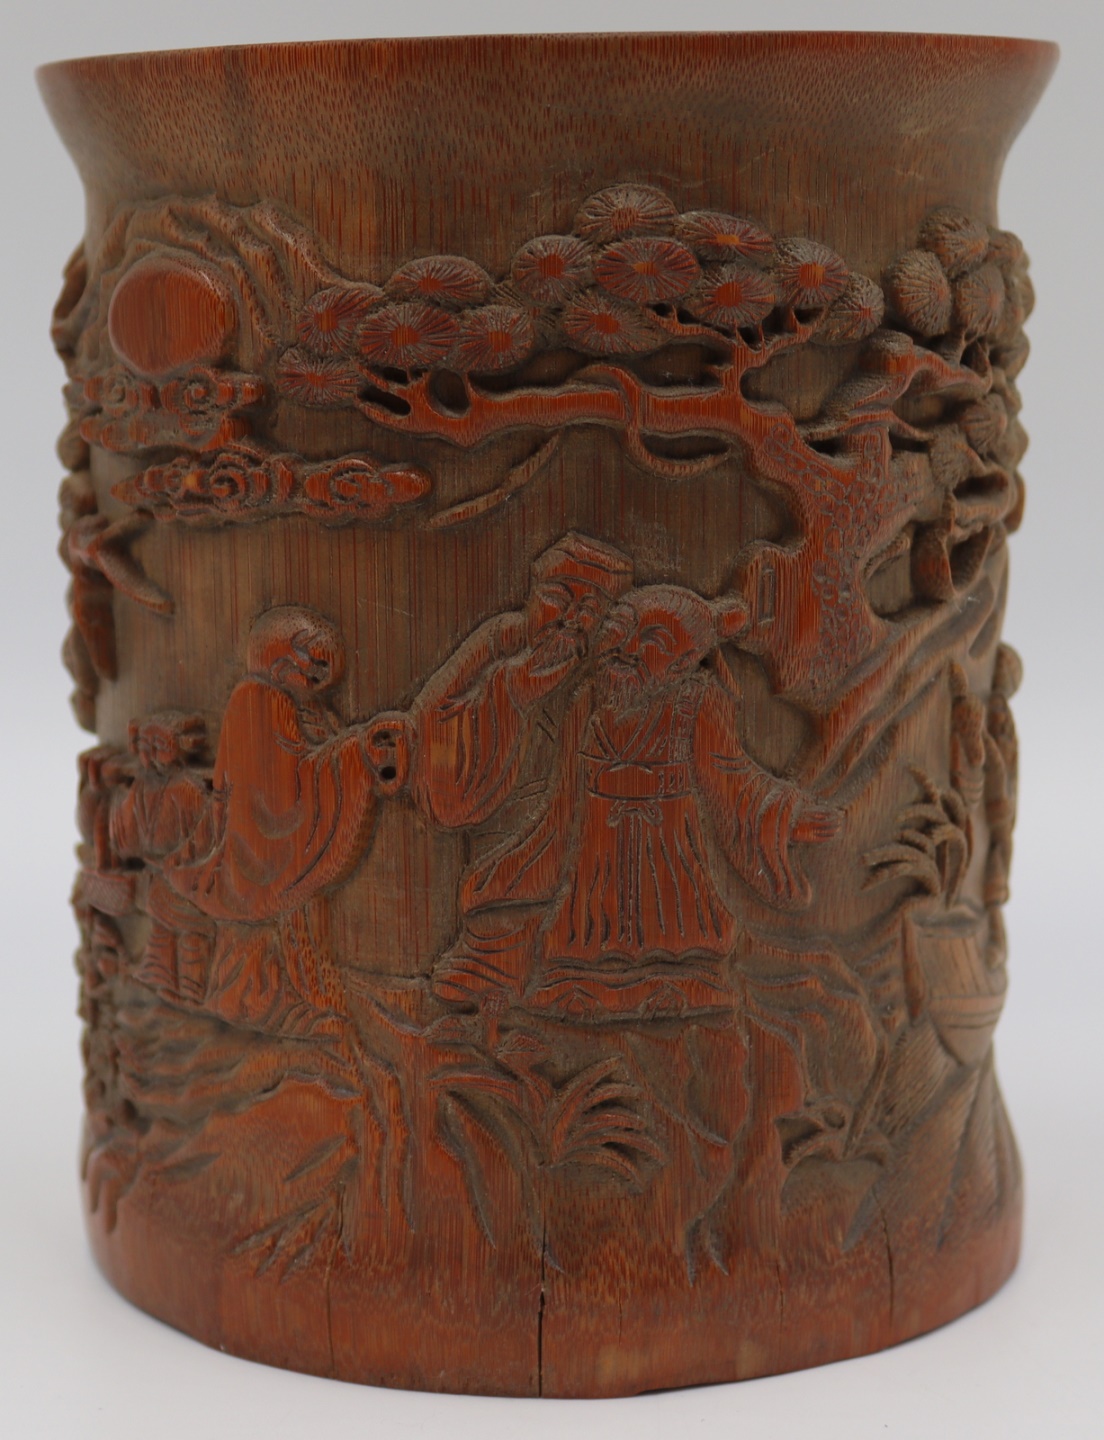 CARVED WOOD BRUSH POT. With fisherman,